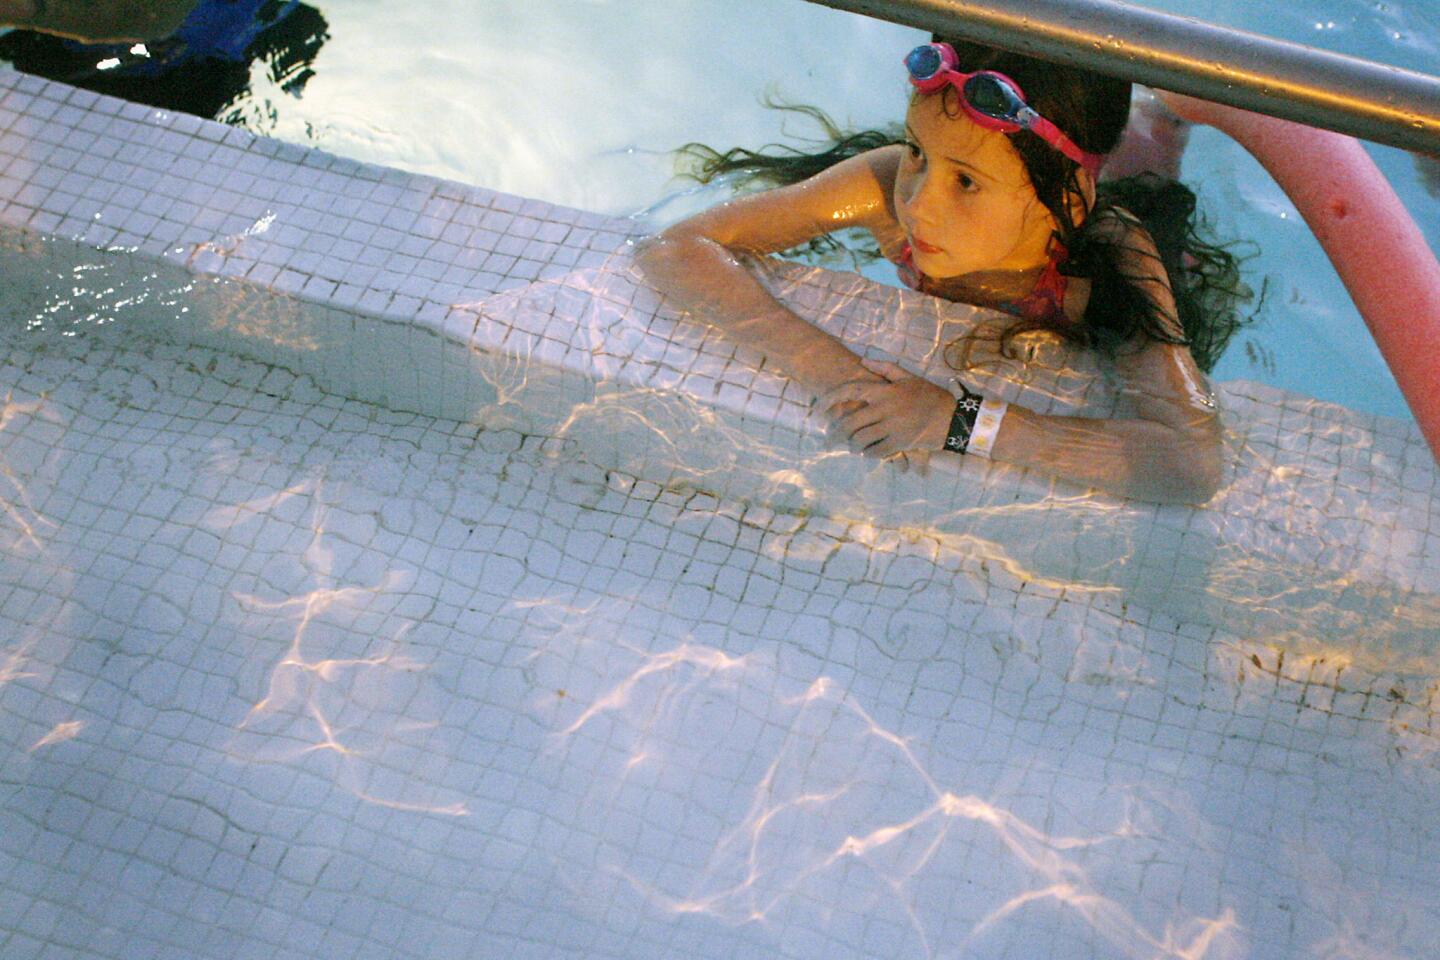 Mckenna Dahlen, 7, watches Dolphin Tales during Dive-In Movie Night, which took place at the Rose Bowl Aquatics Center in Pasadena on Saturday, June 23, 2012.